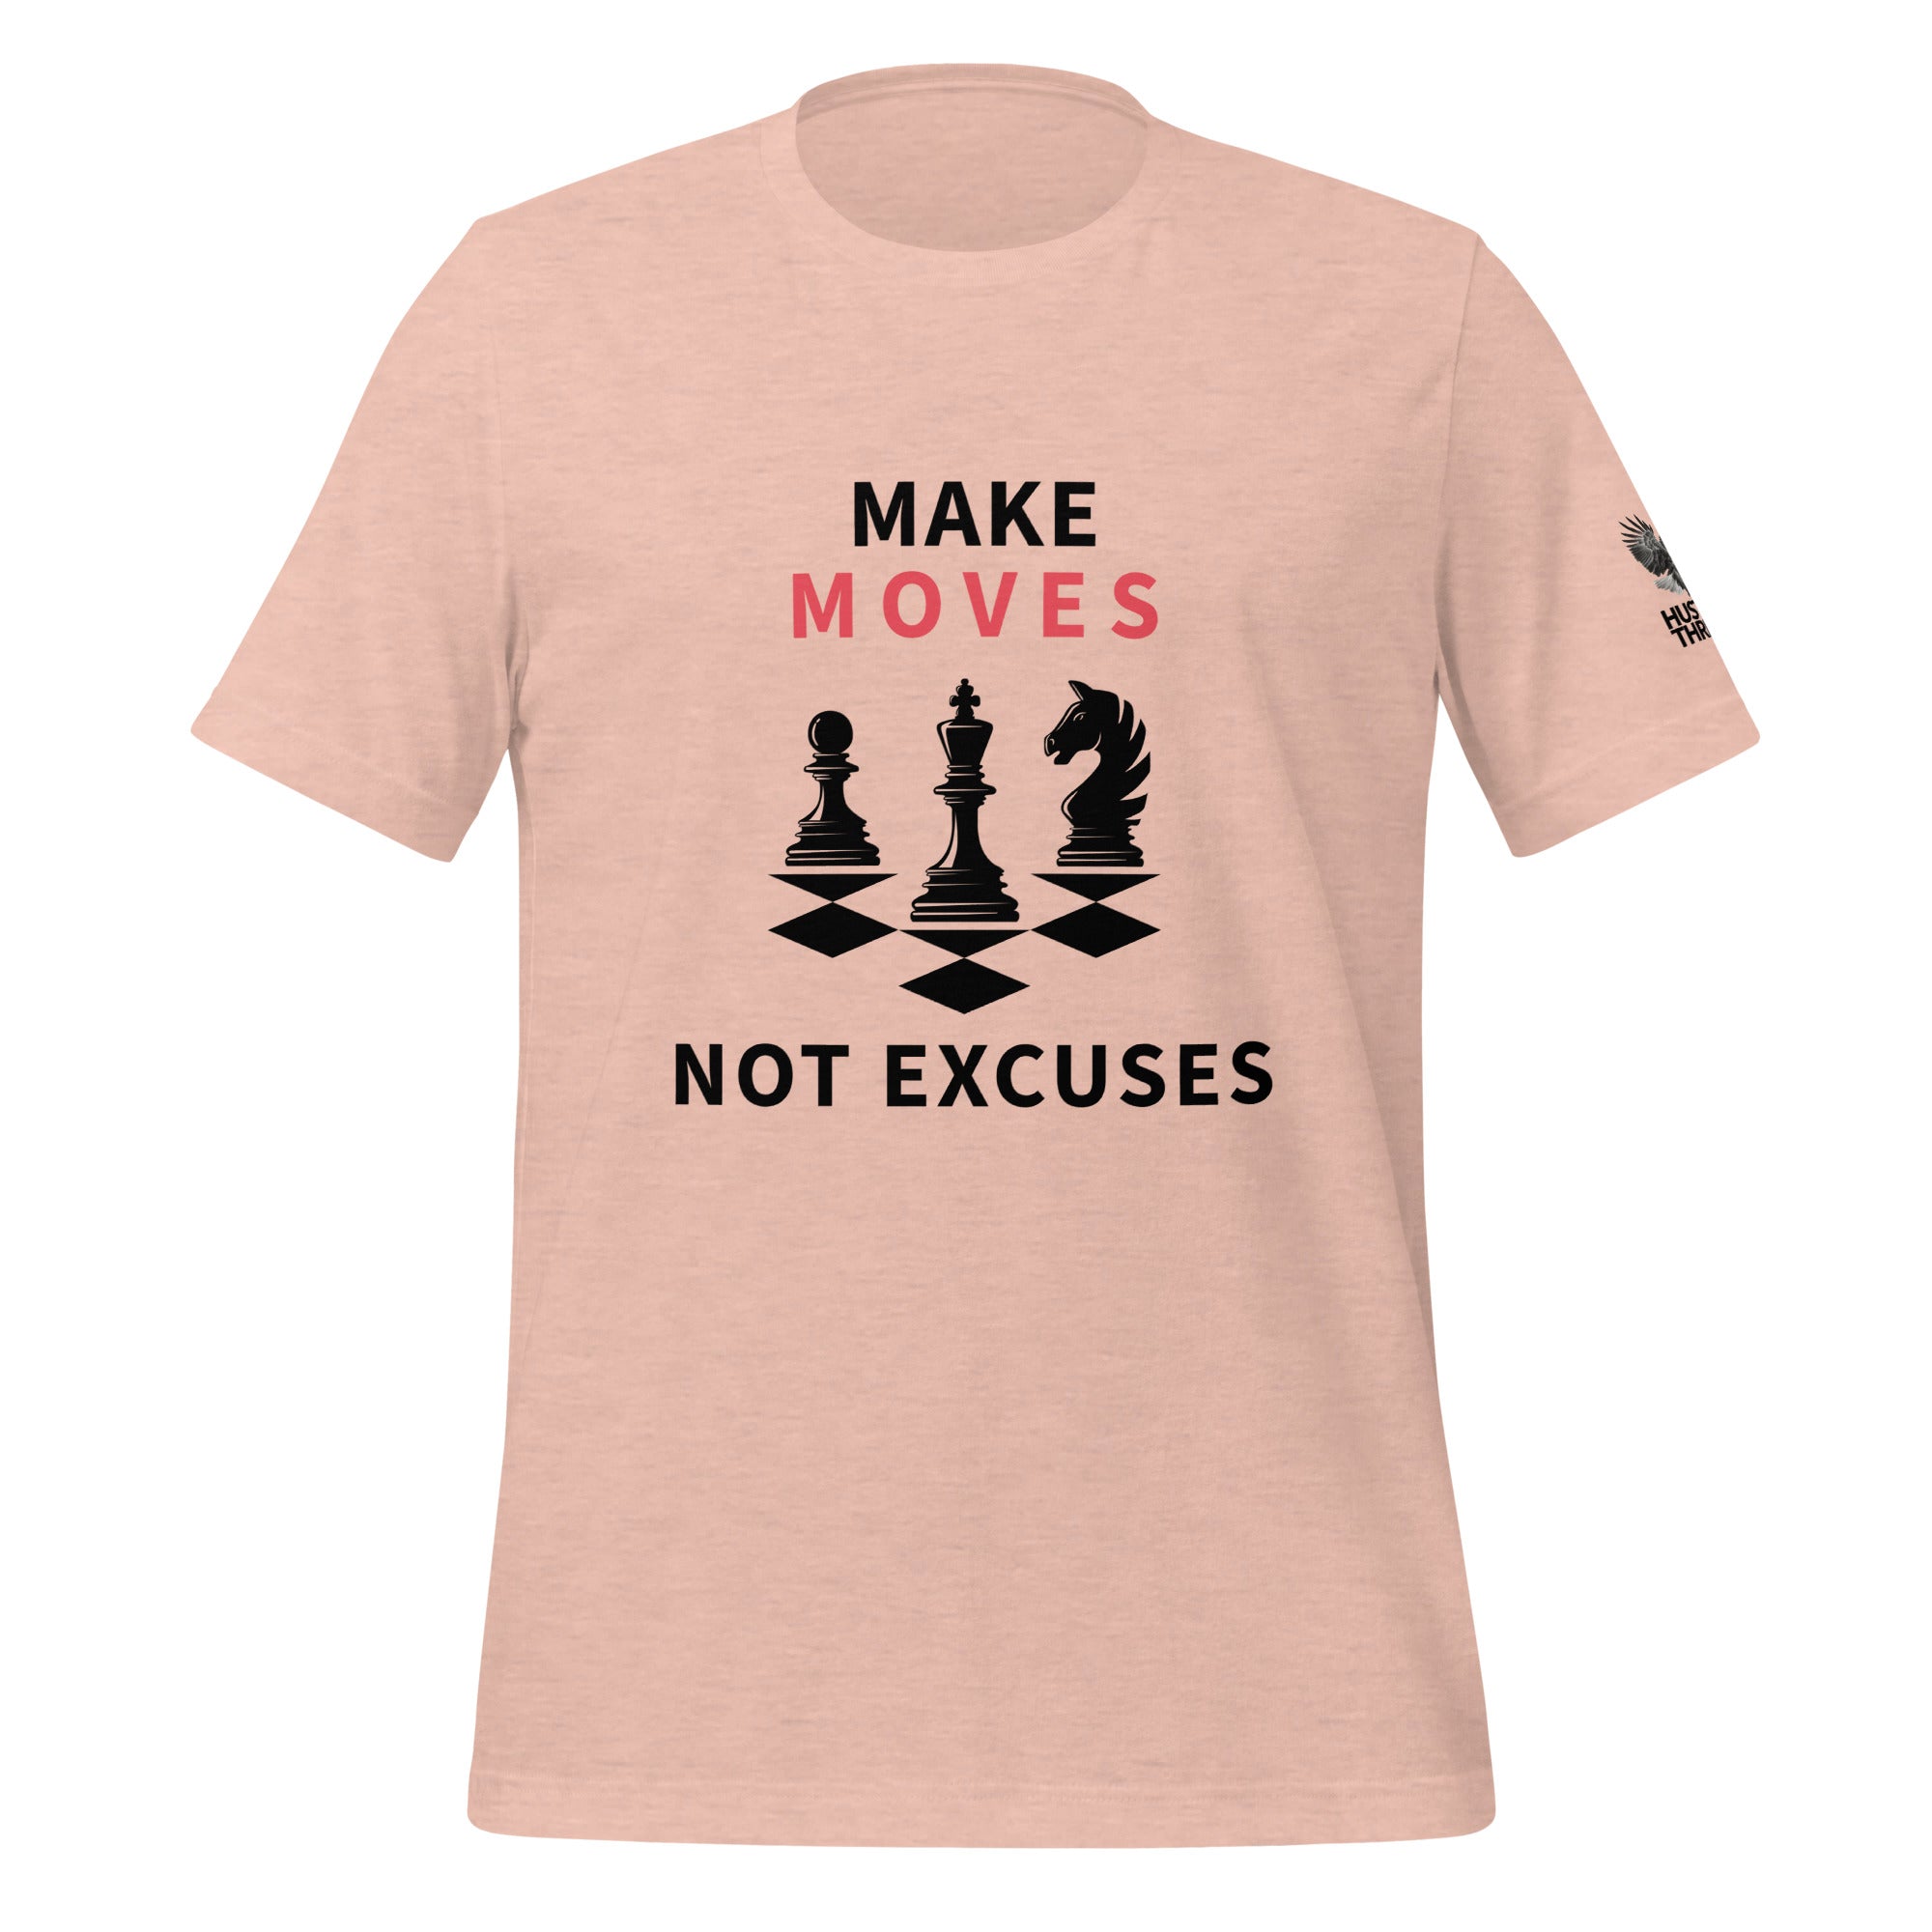 Women's Make Moves Not Excuses T-Shirt